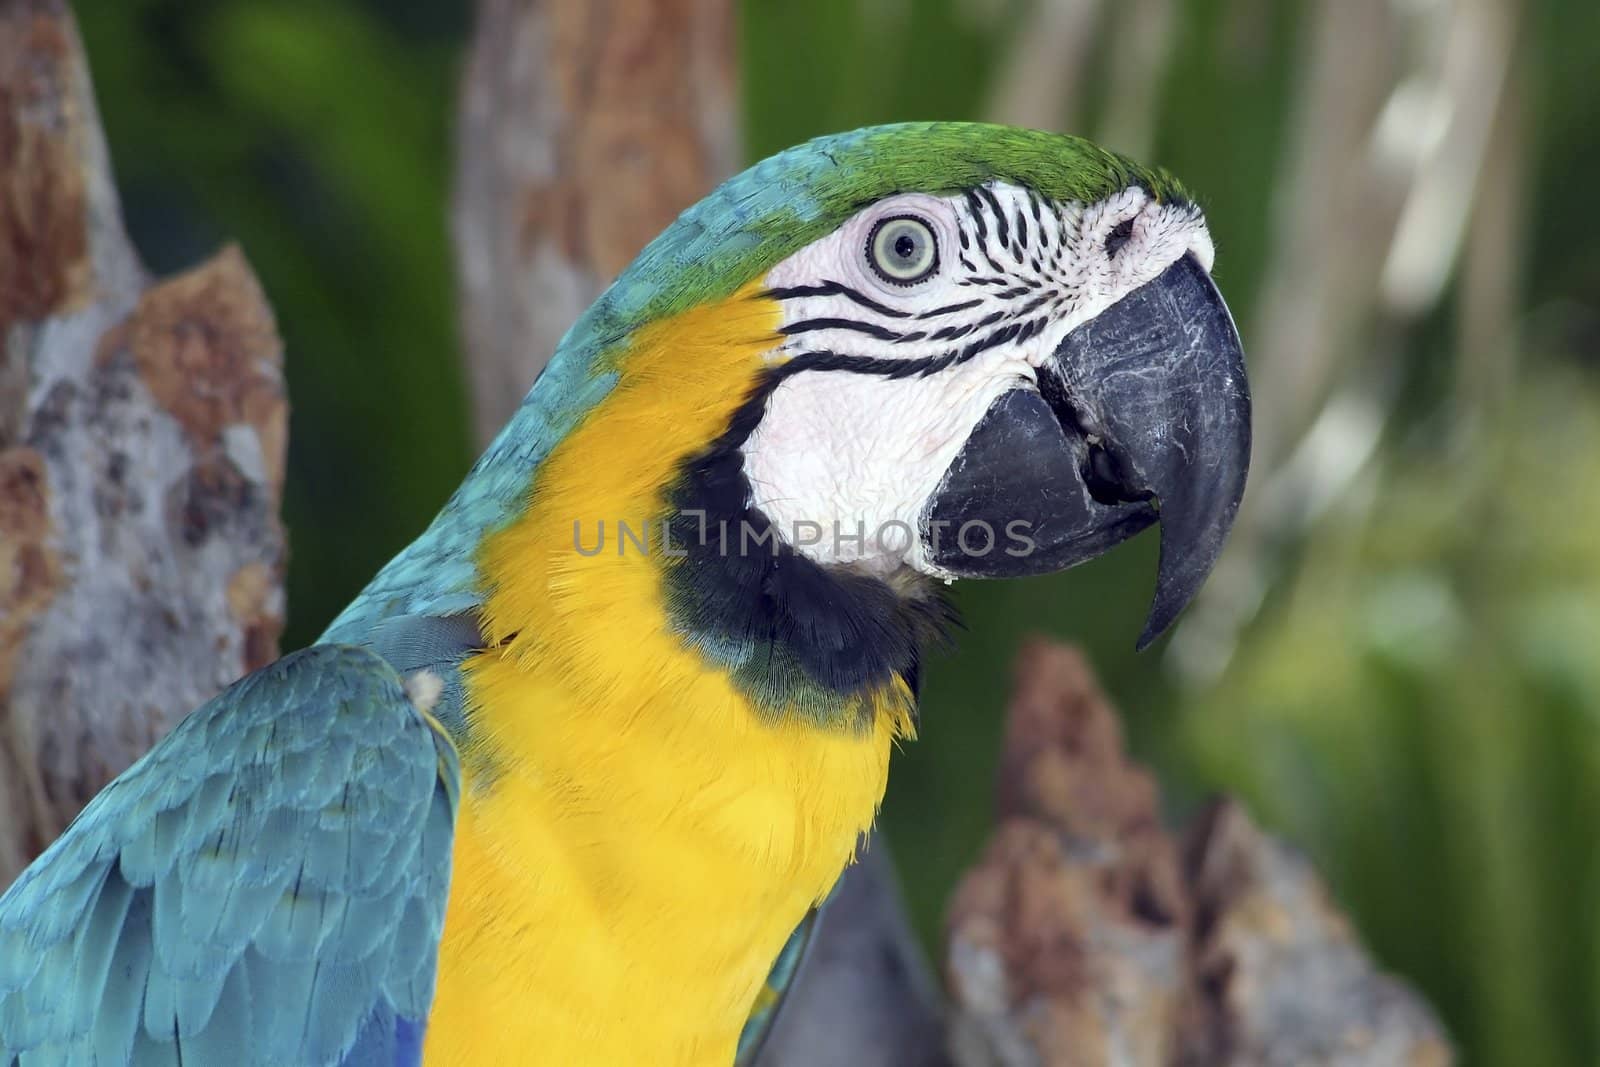 Portrait of a colorful Macaw